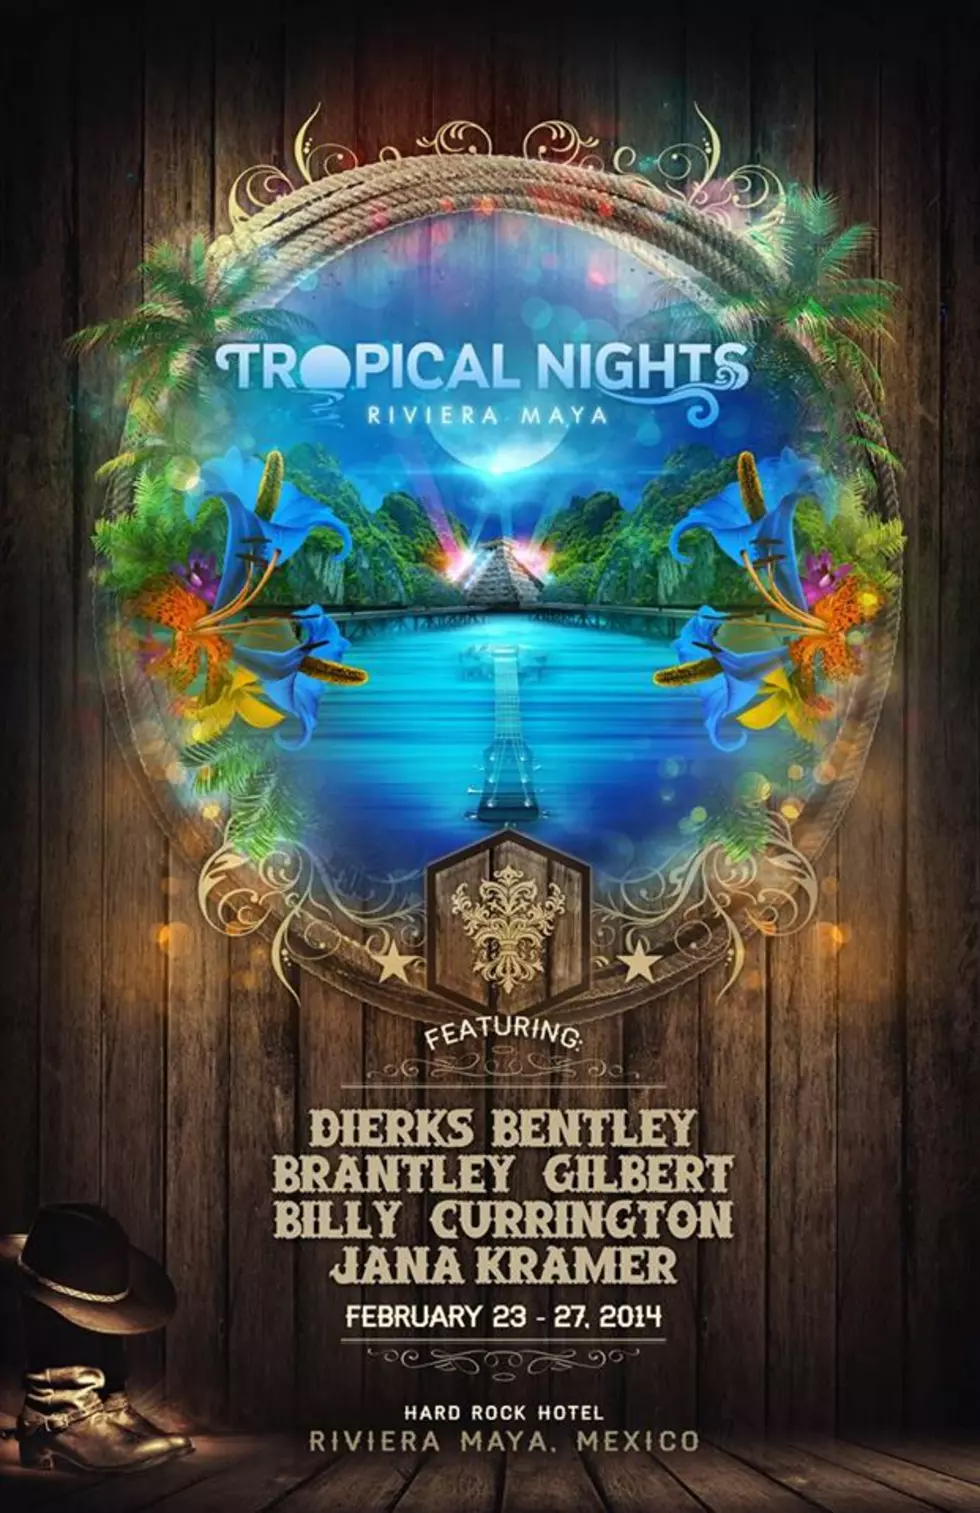 8 Songs You&#8217;ll Hear at Tropical Nights: Boots in the Sand